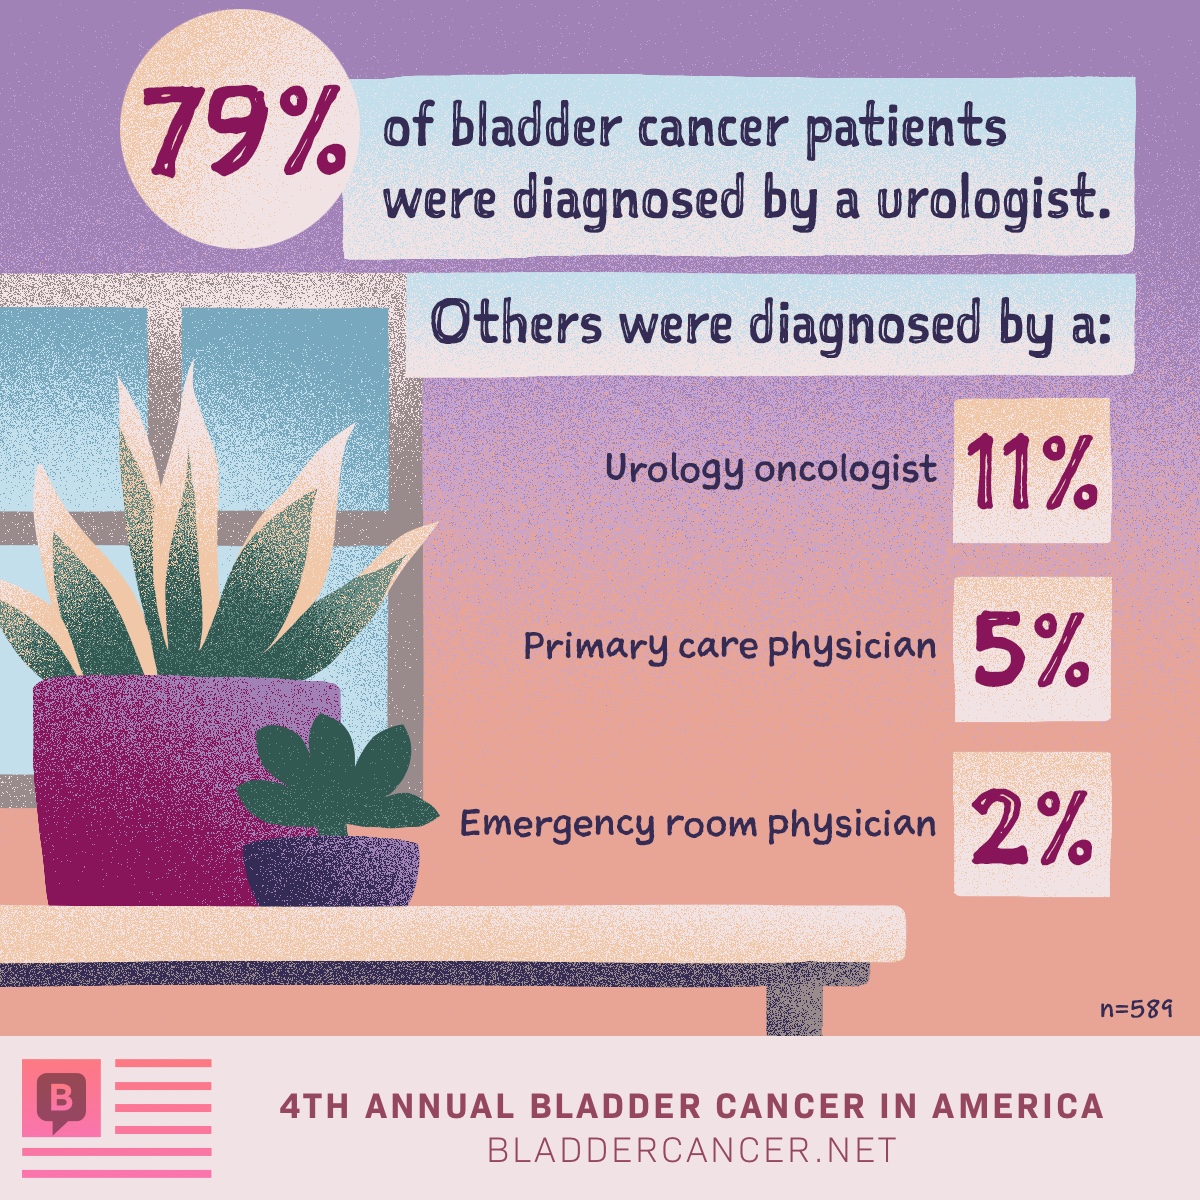 79% of bladder cancer patients were diagnosed by a urologist.